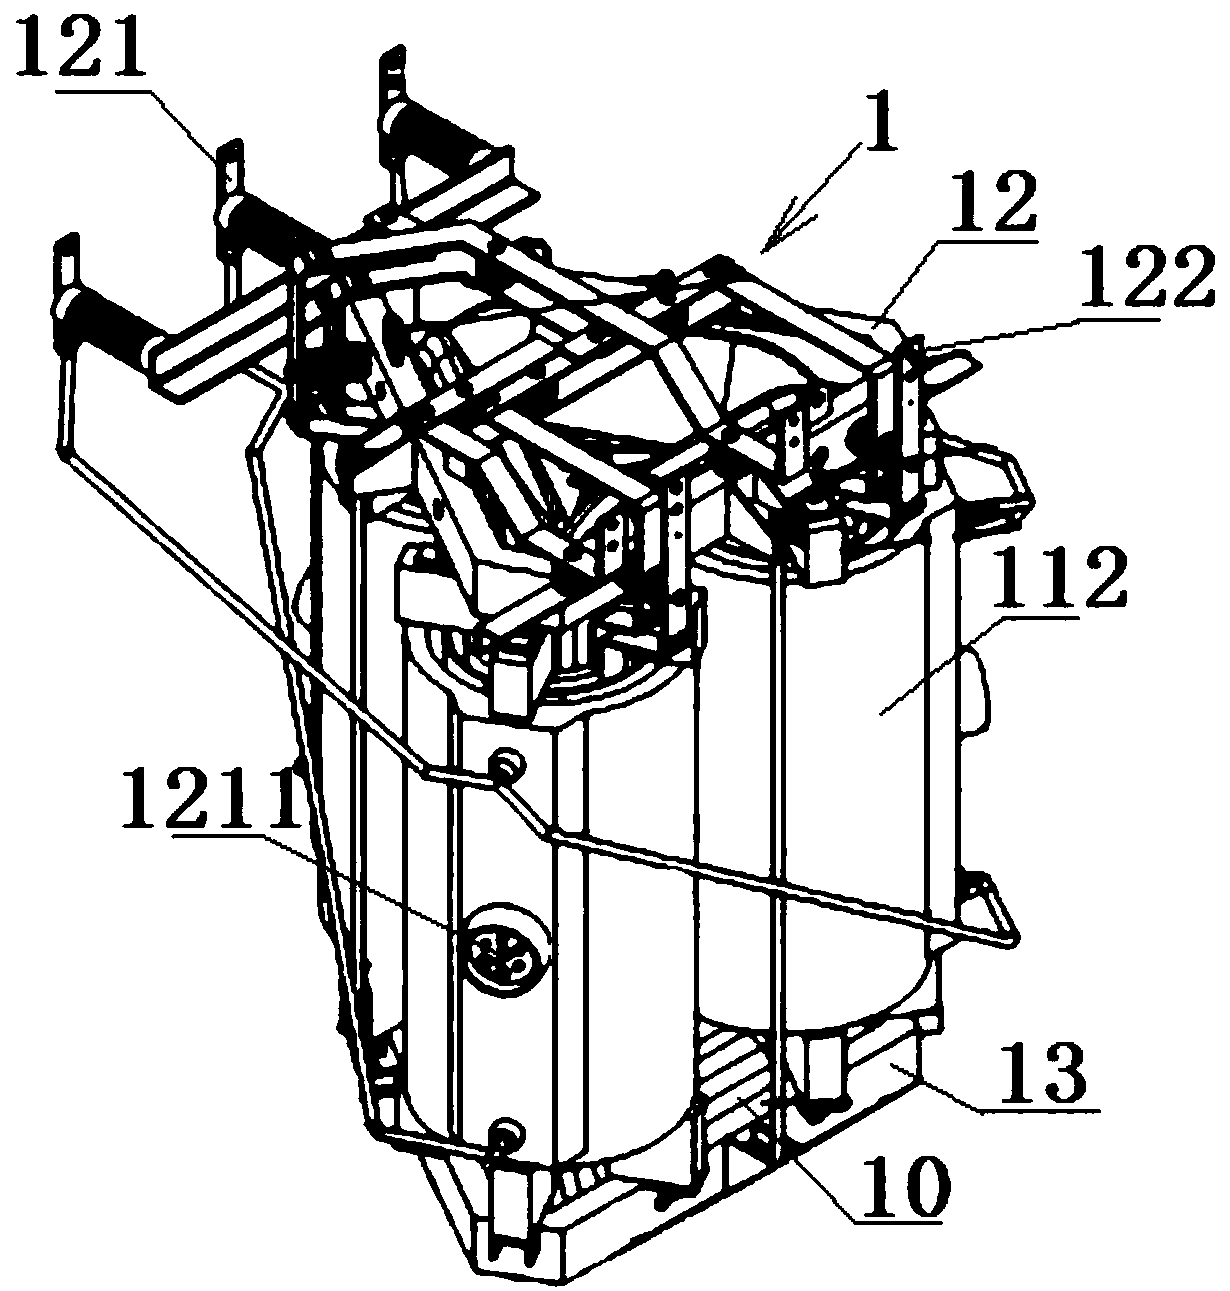 A three-dimensional wound core resin insulated dry-type transformer